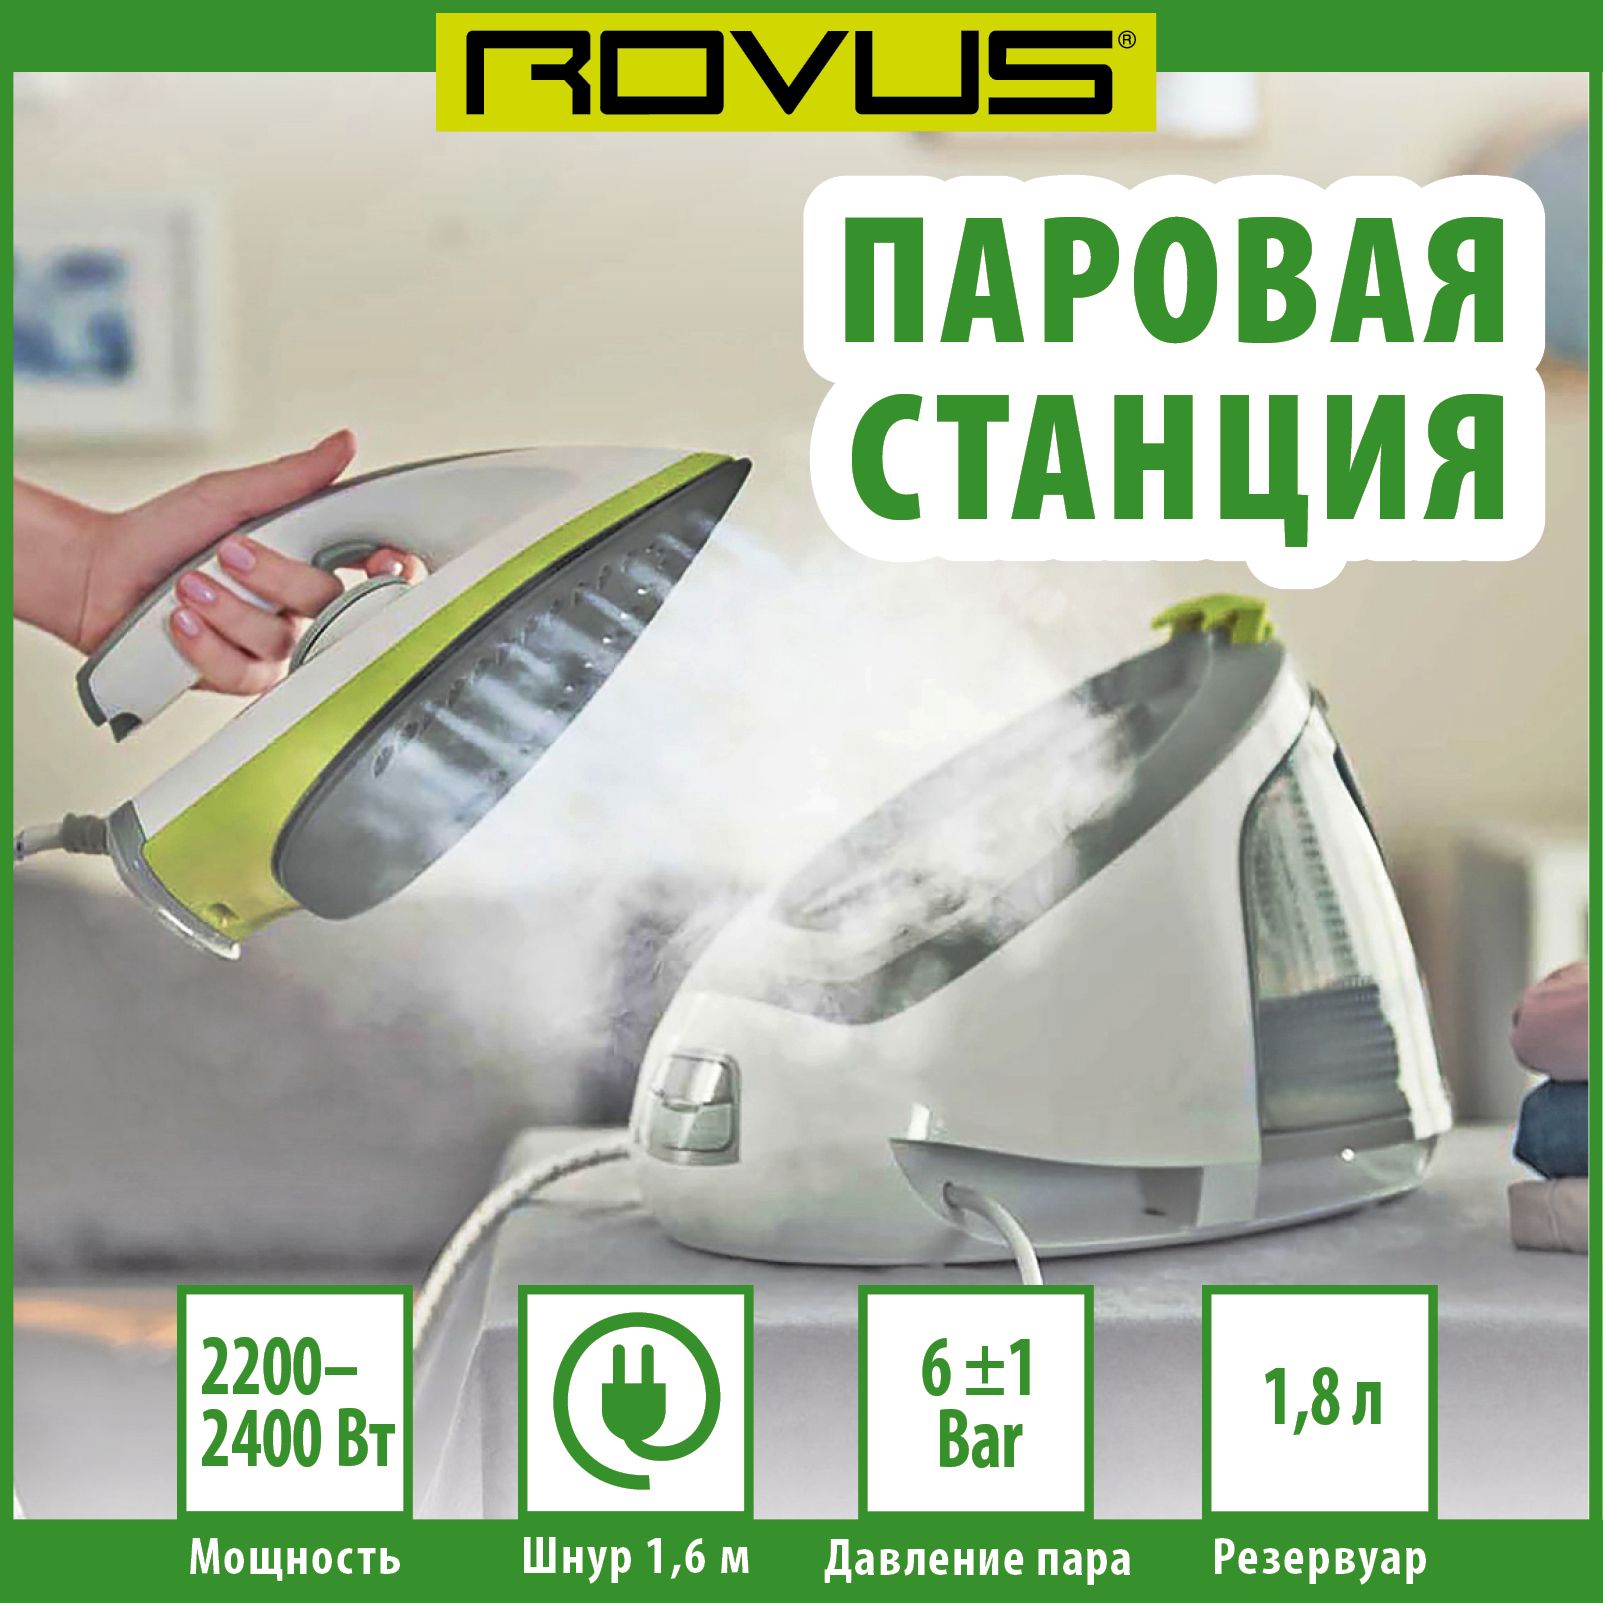 Gold rovus multipurpose steam station 19 in 1 фото 58